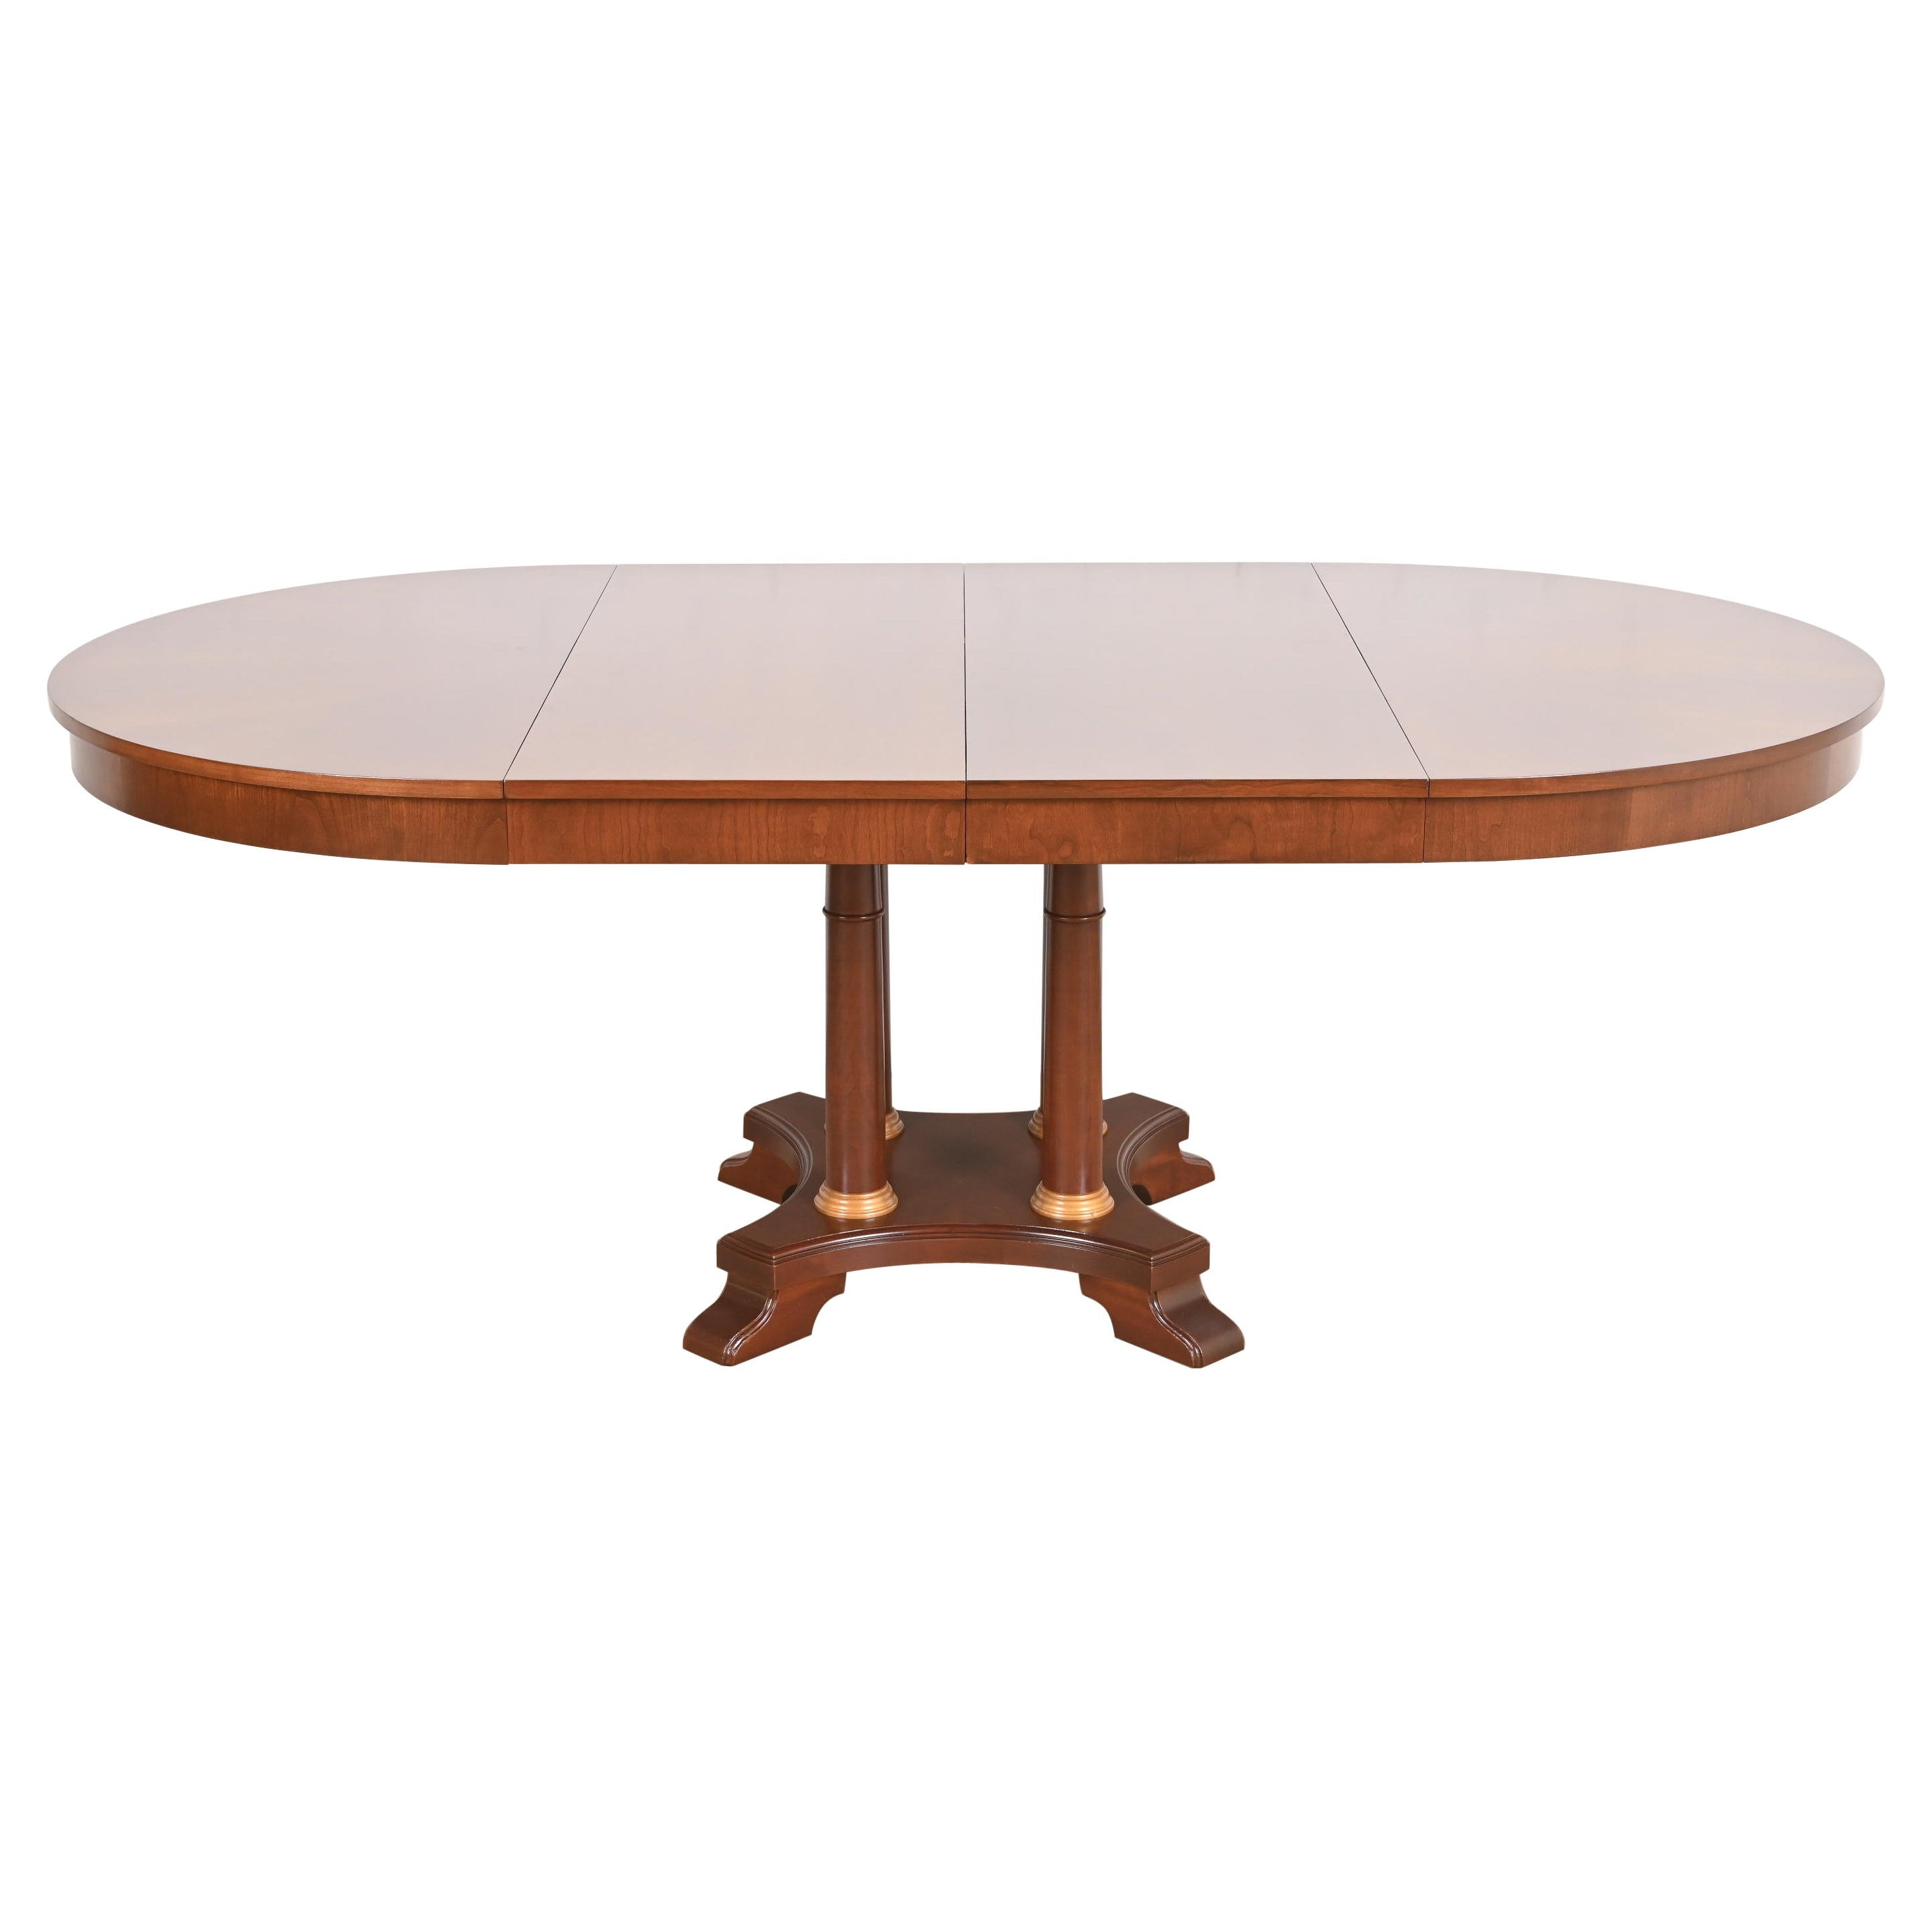 Neoclassical or Empire Cherry Wood Pedestal Dining Table, Newly Refinished